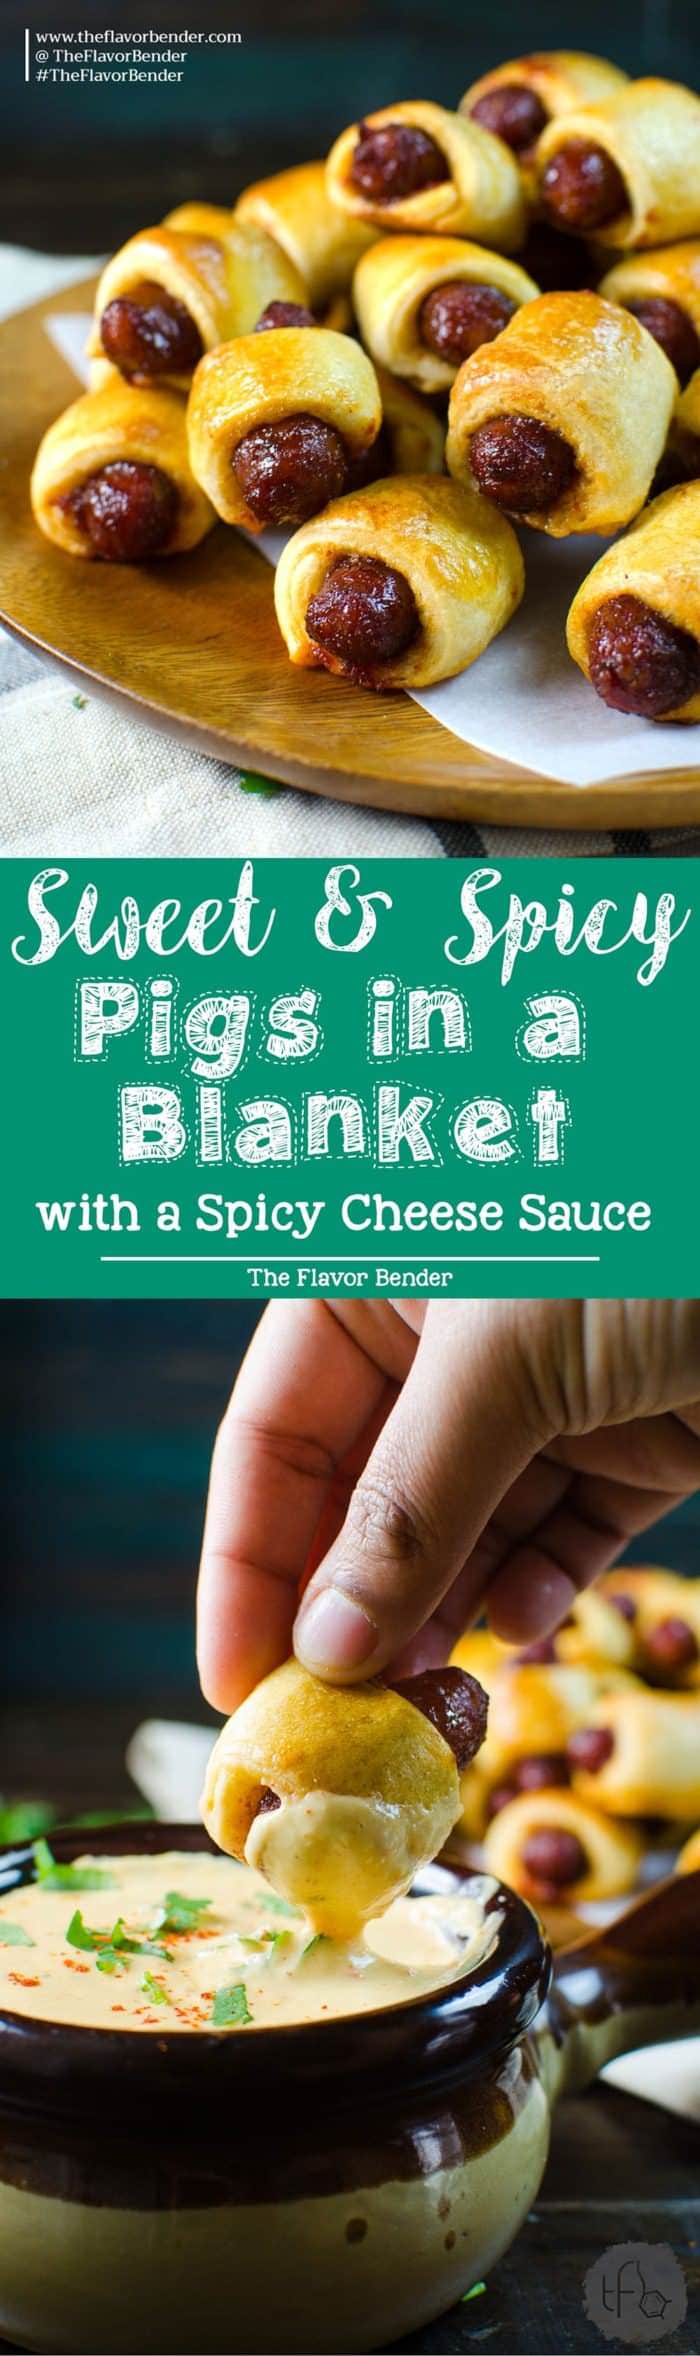 Sweet and Spicy Pigs in a Blanket - Kick up your regular Pigs in a Blanket with this sweet and spicy version served with a creamy spicy cheese sauce, spiced with Habanero and Mustard. Perfect for Holiday Parties, Game day snacks, March Madness or any party! Party food | Appetizers | Pigs in a Blanket | Crescent dough | Nacho Sauce | Cheese Sauce | Game Day | March Madness | Holiday Appetizers